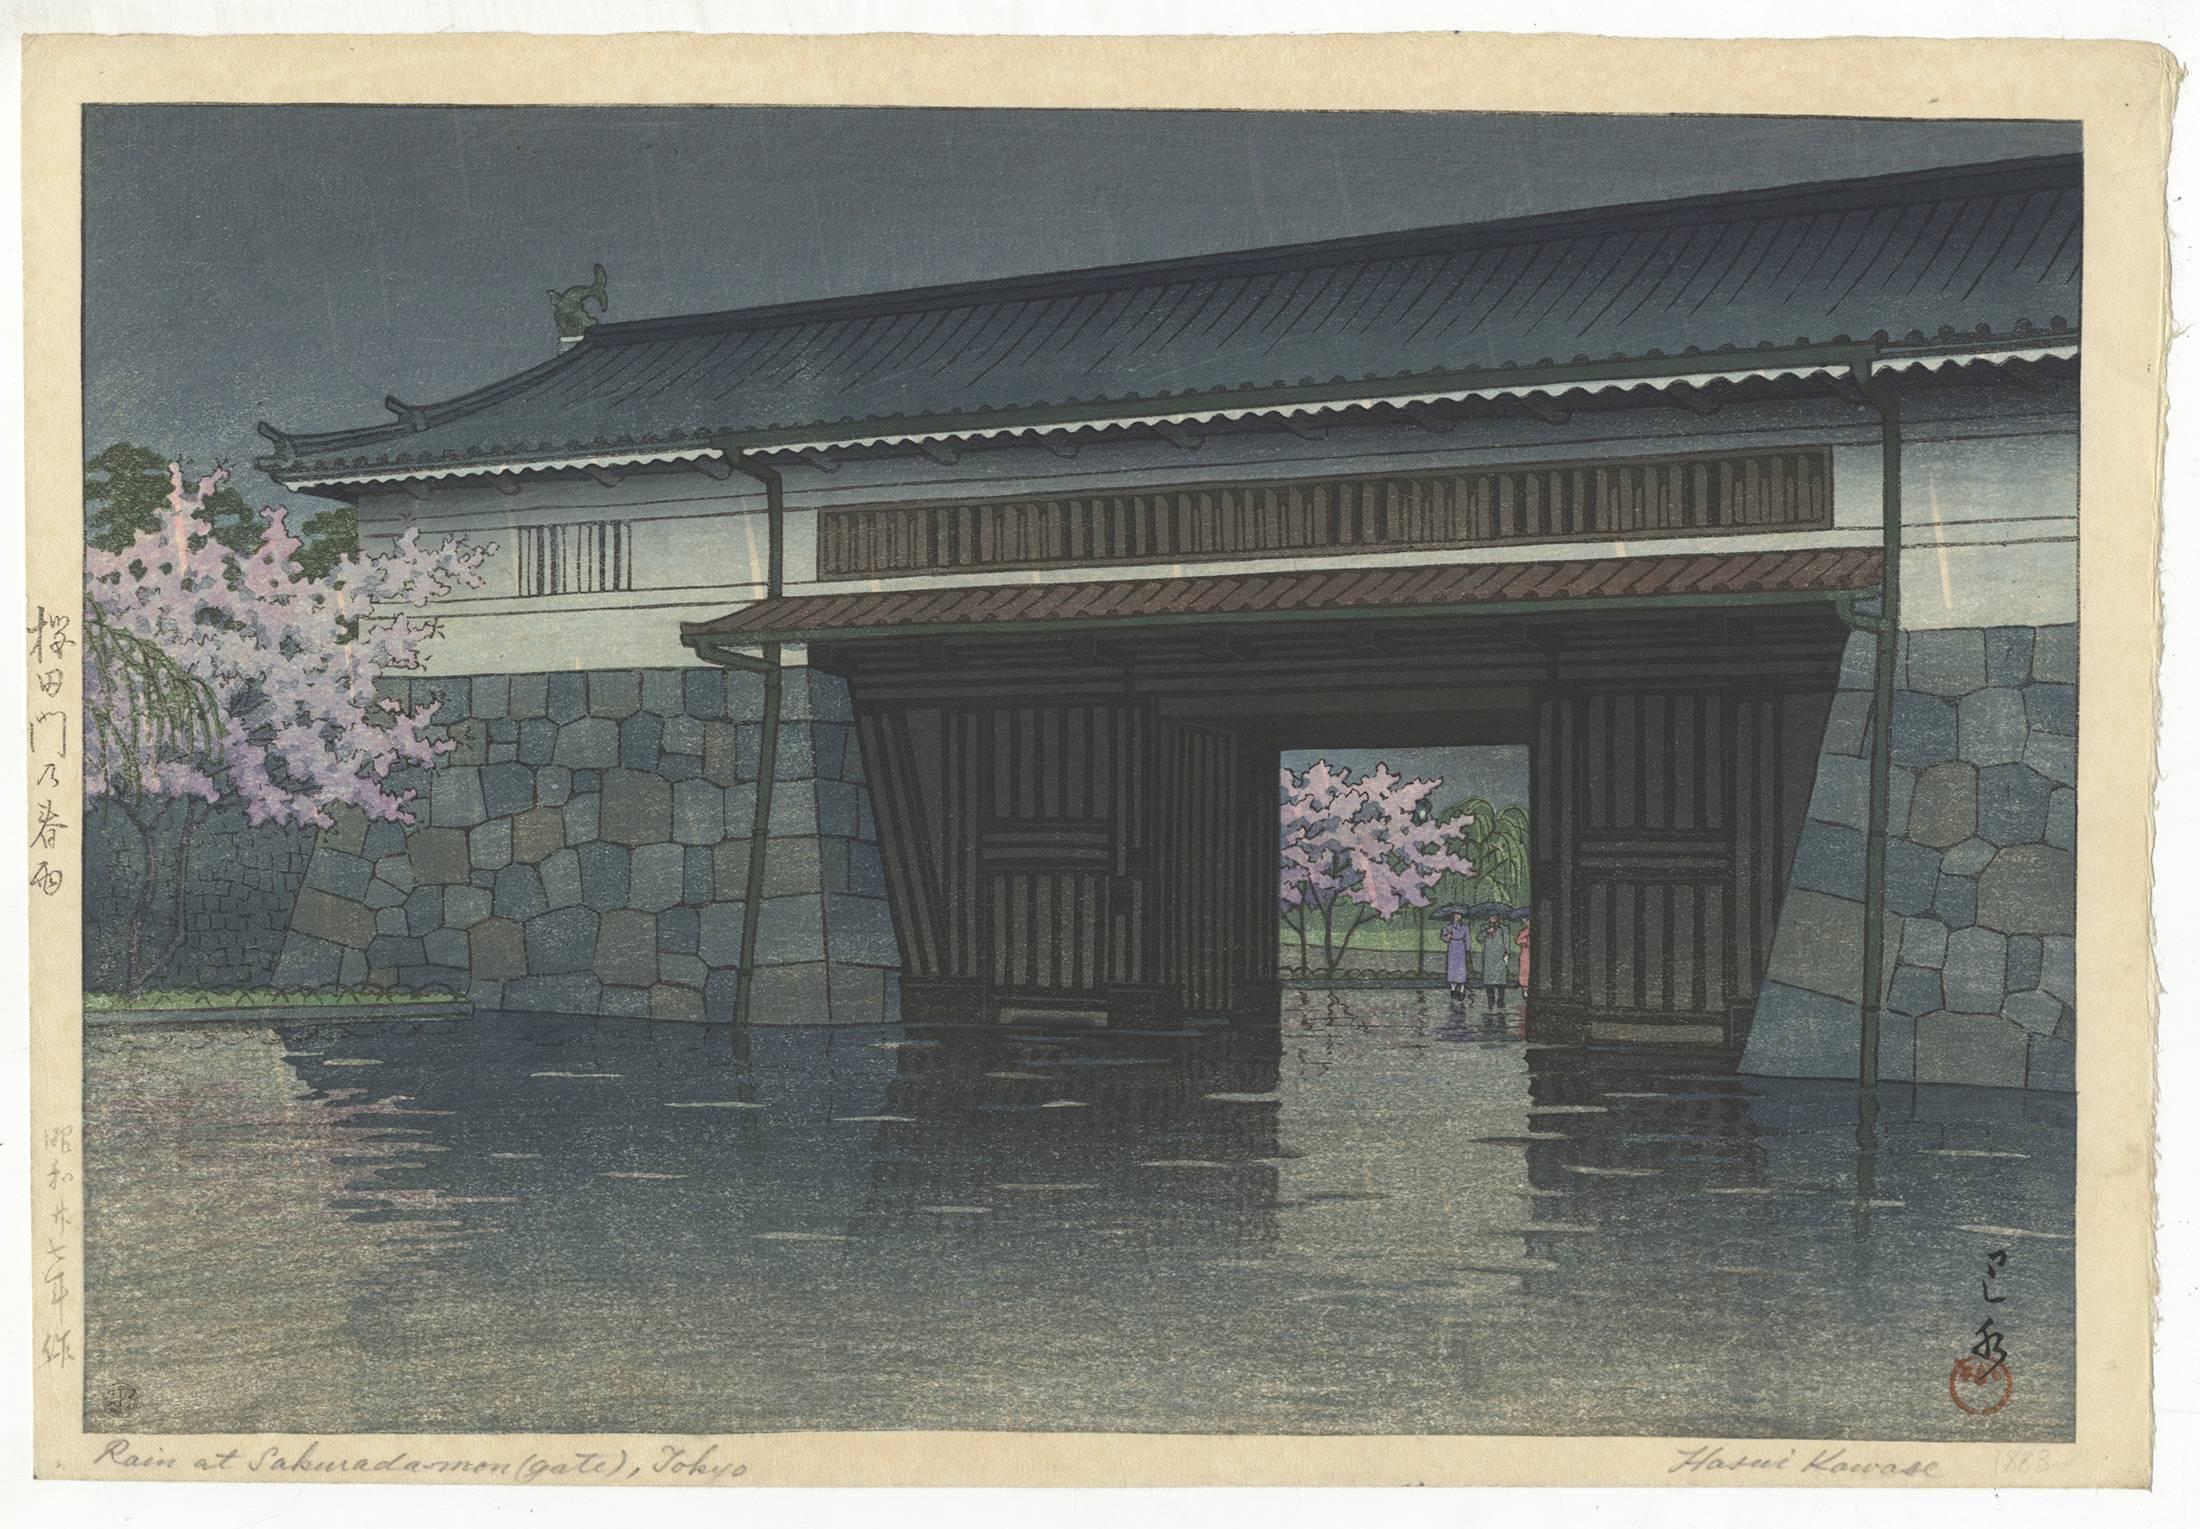 Artist: Hasui Kawase (1883-1957)
Title: Spring Rain at Sakurada Gate
Date: pub. 1946-1957
Dimensions: 38.7 x 26.5 cm 
Condition: Very light soiling on the margins. 

This quiet scene shows the Sakurada-mon gate at night time. The gate was part of